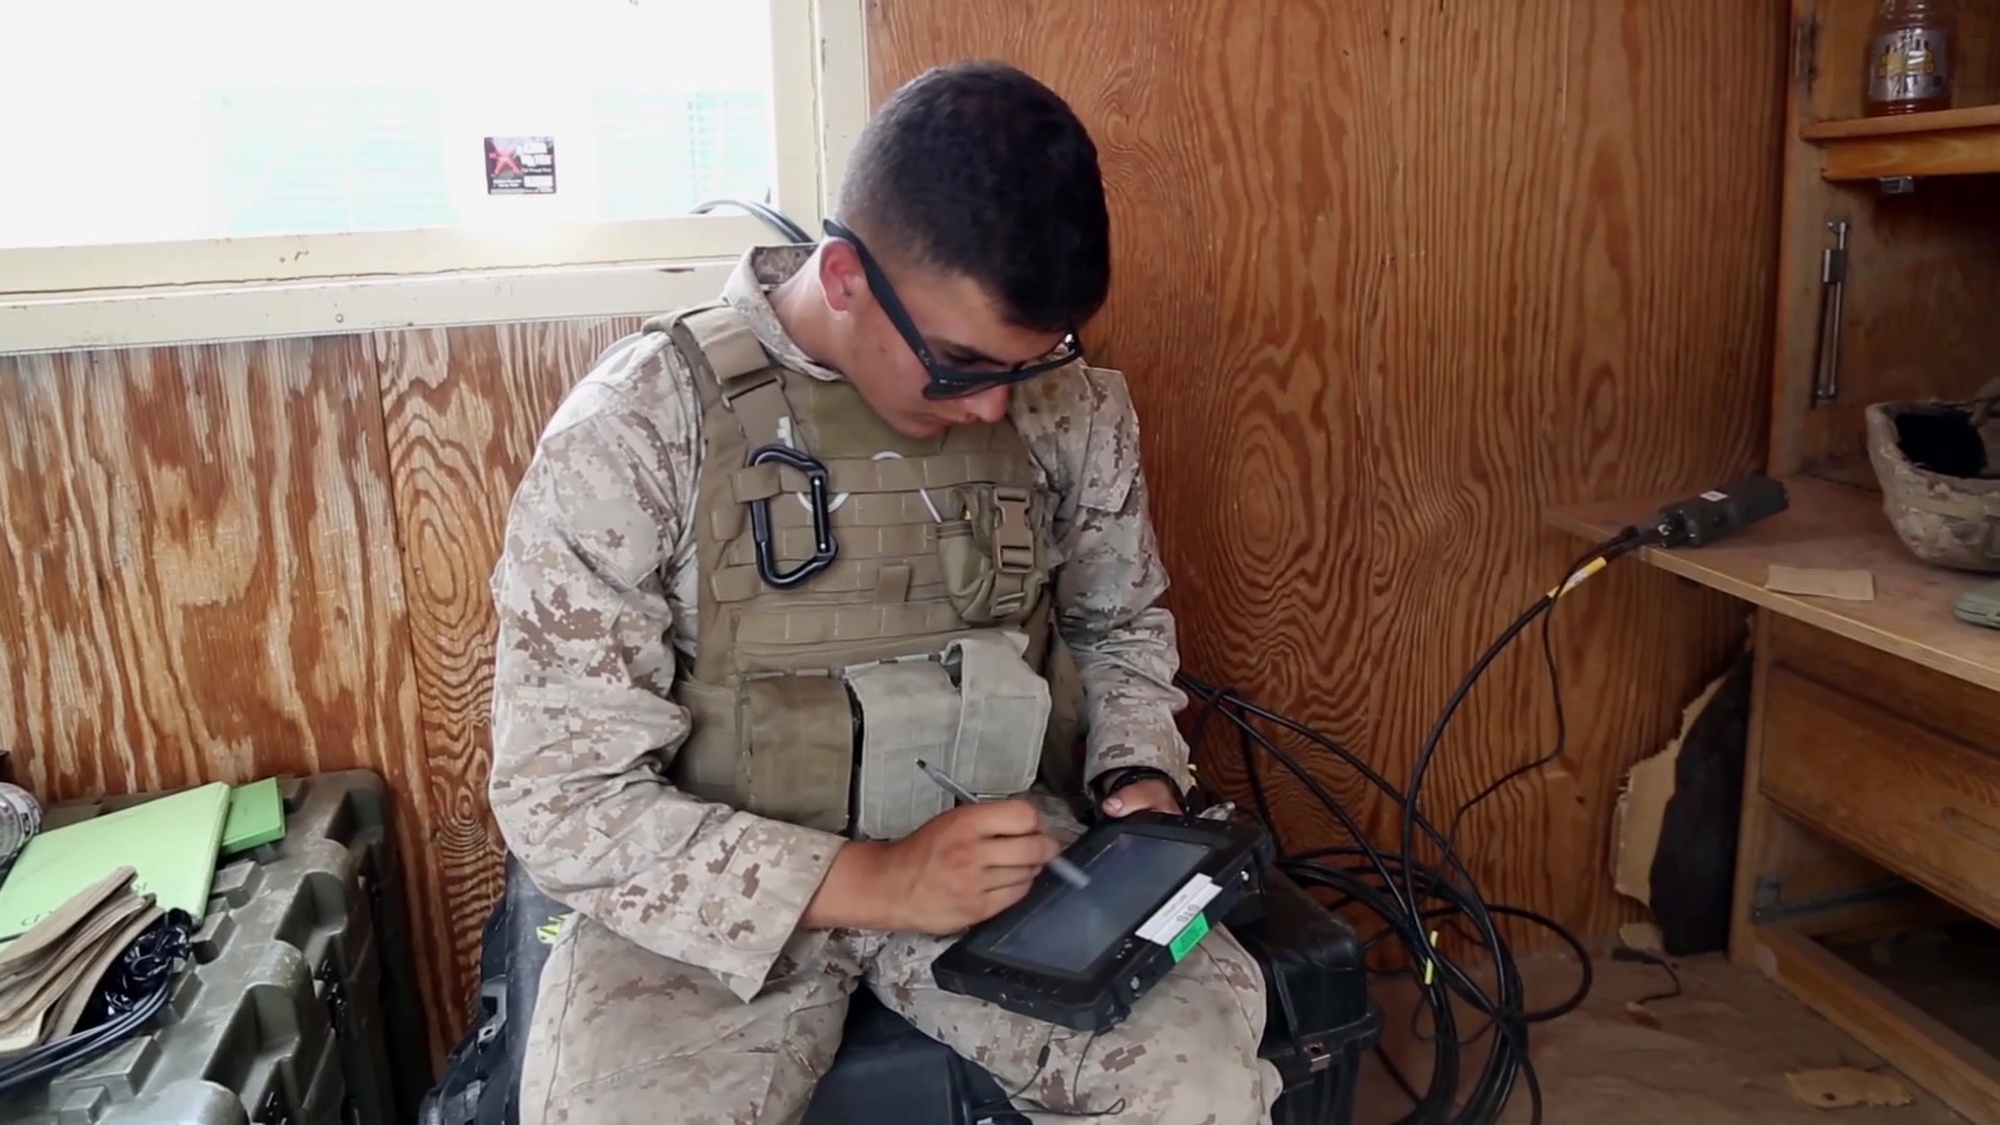 Use the EOD IR Line Laser while conducting NVG operations.